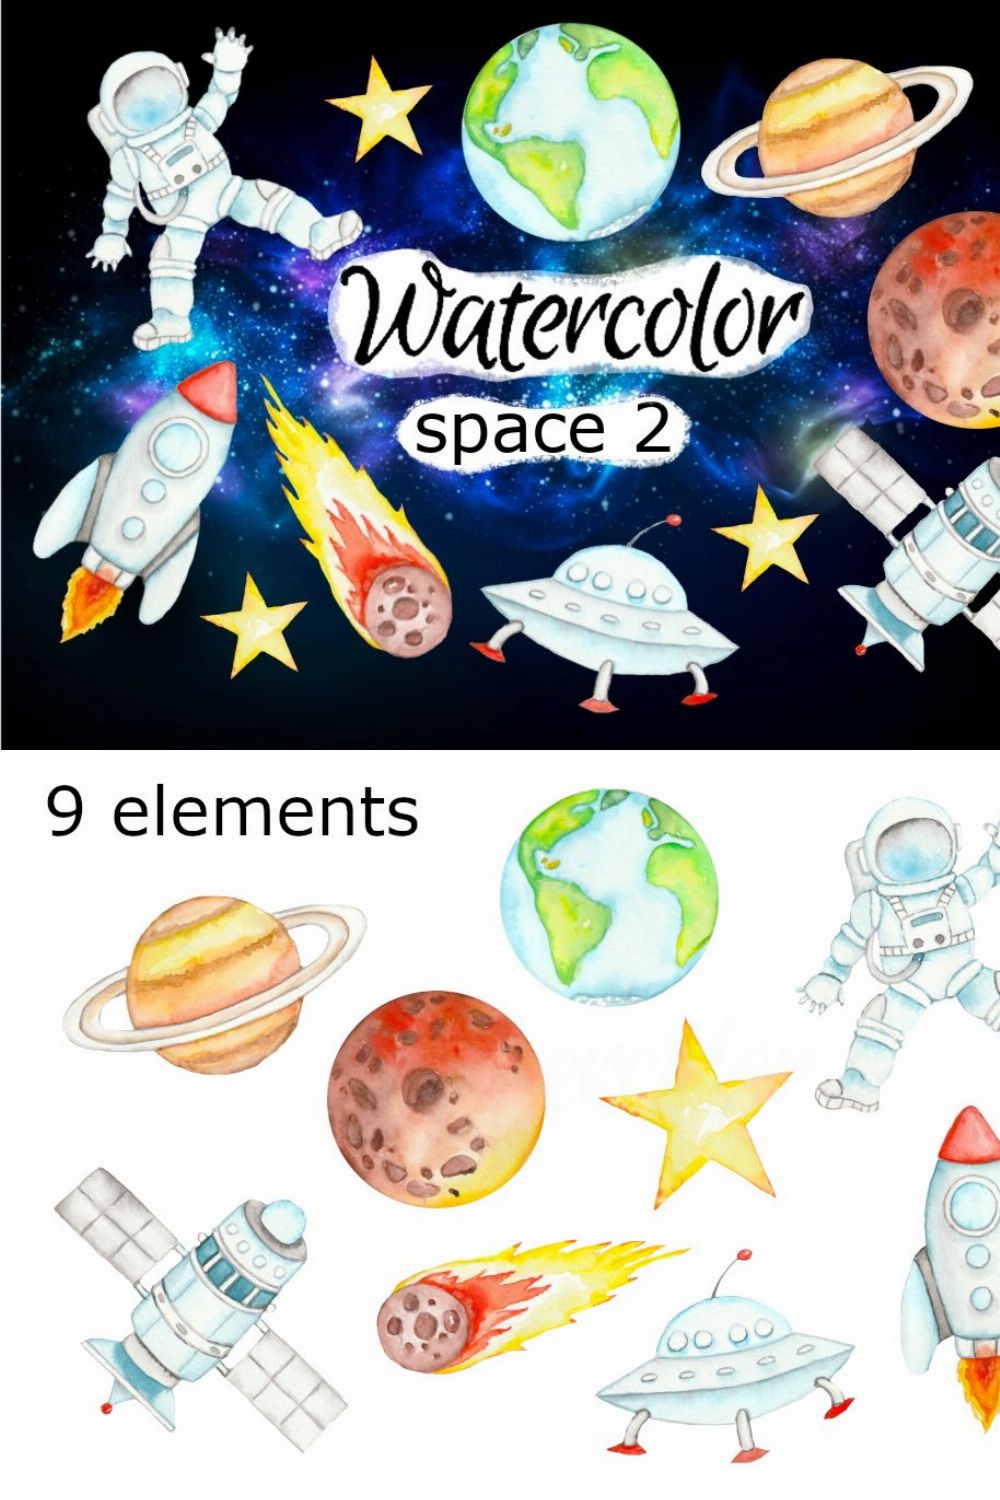 Space 2 watercolor clipart pinterest preview image.